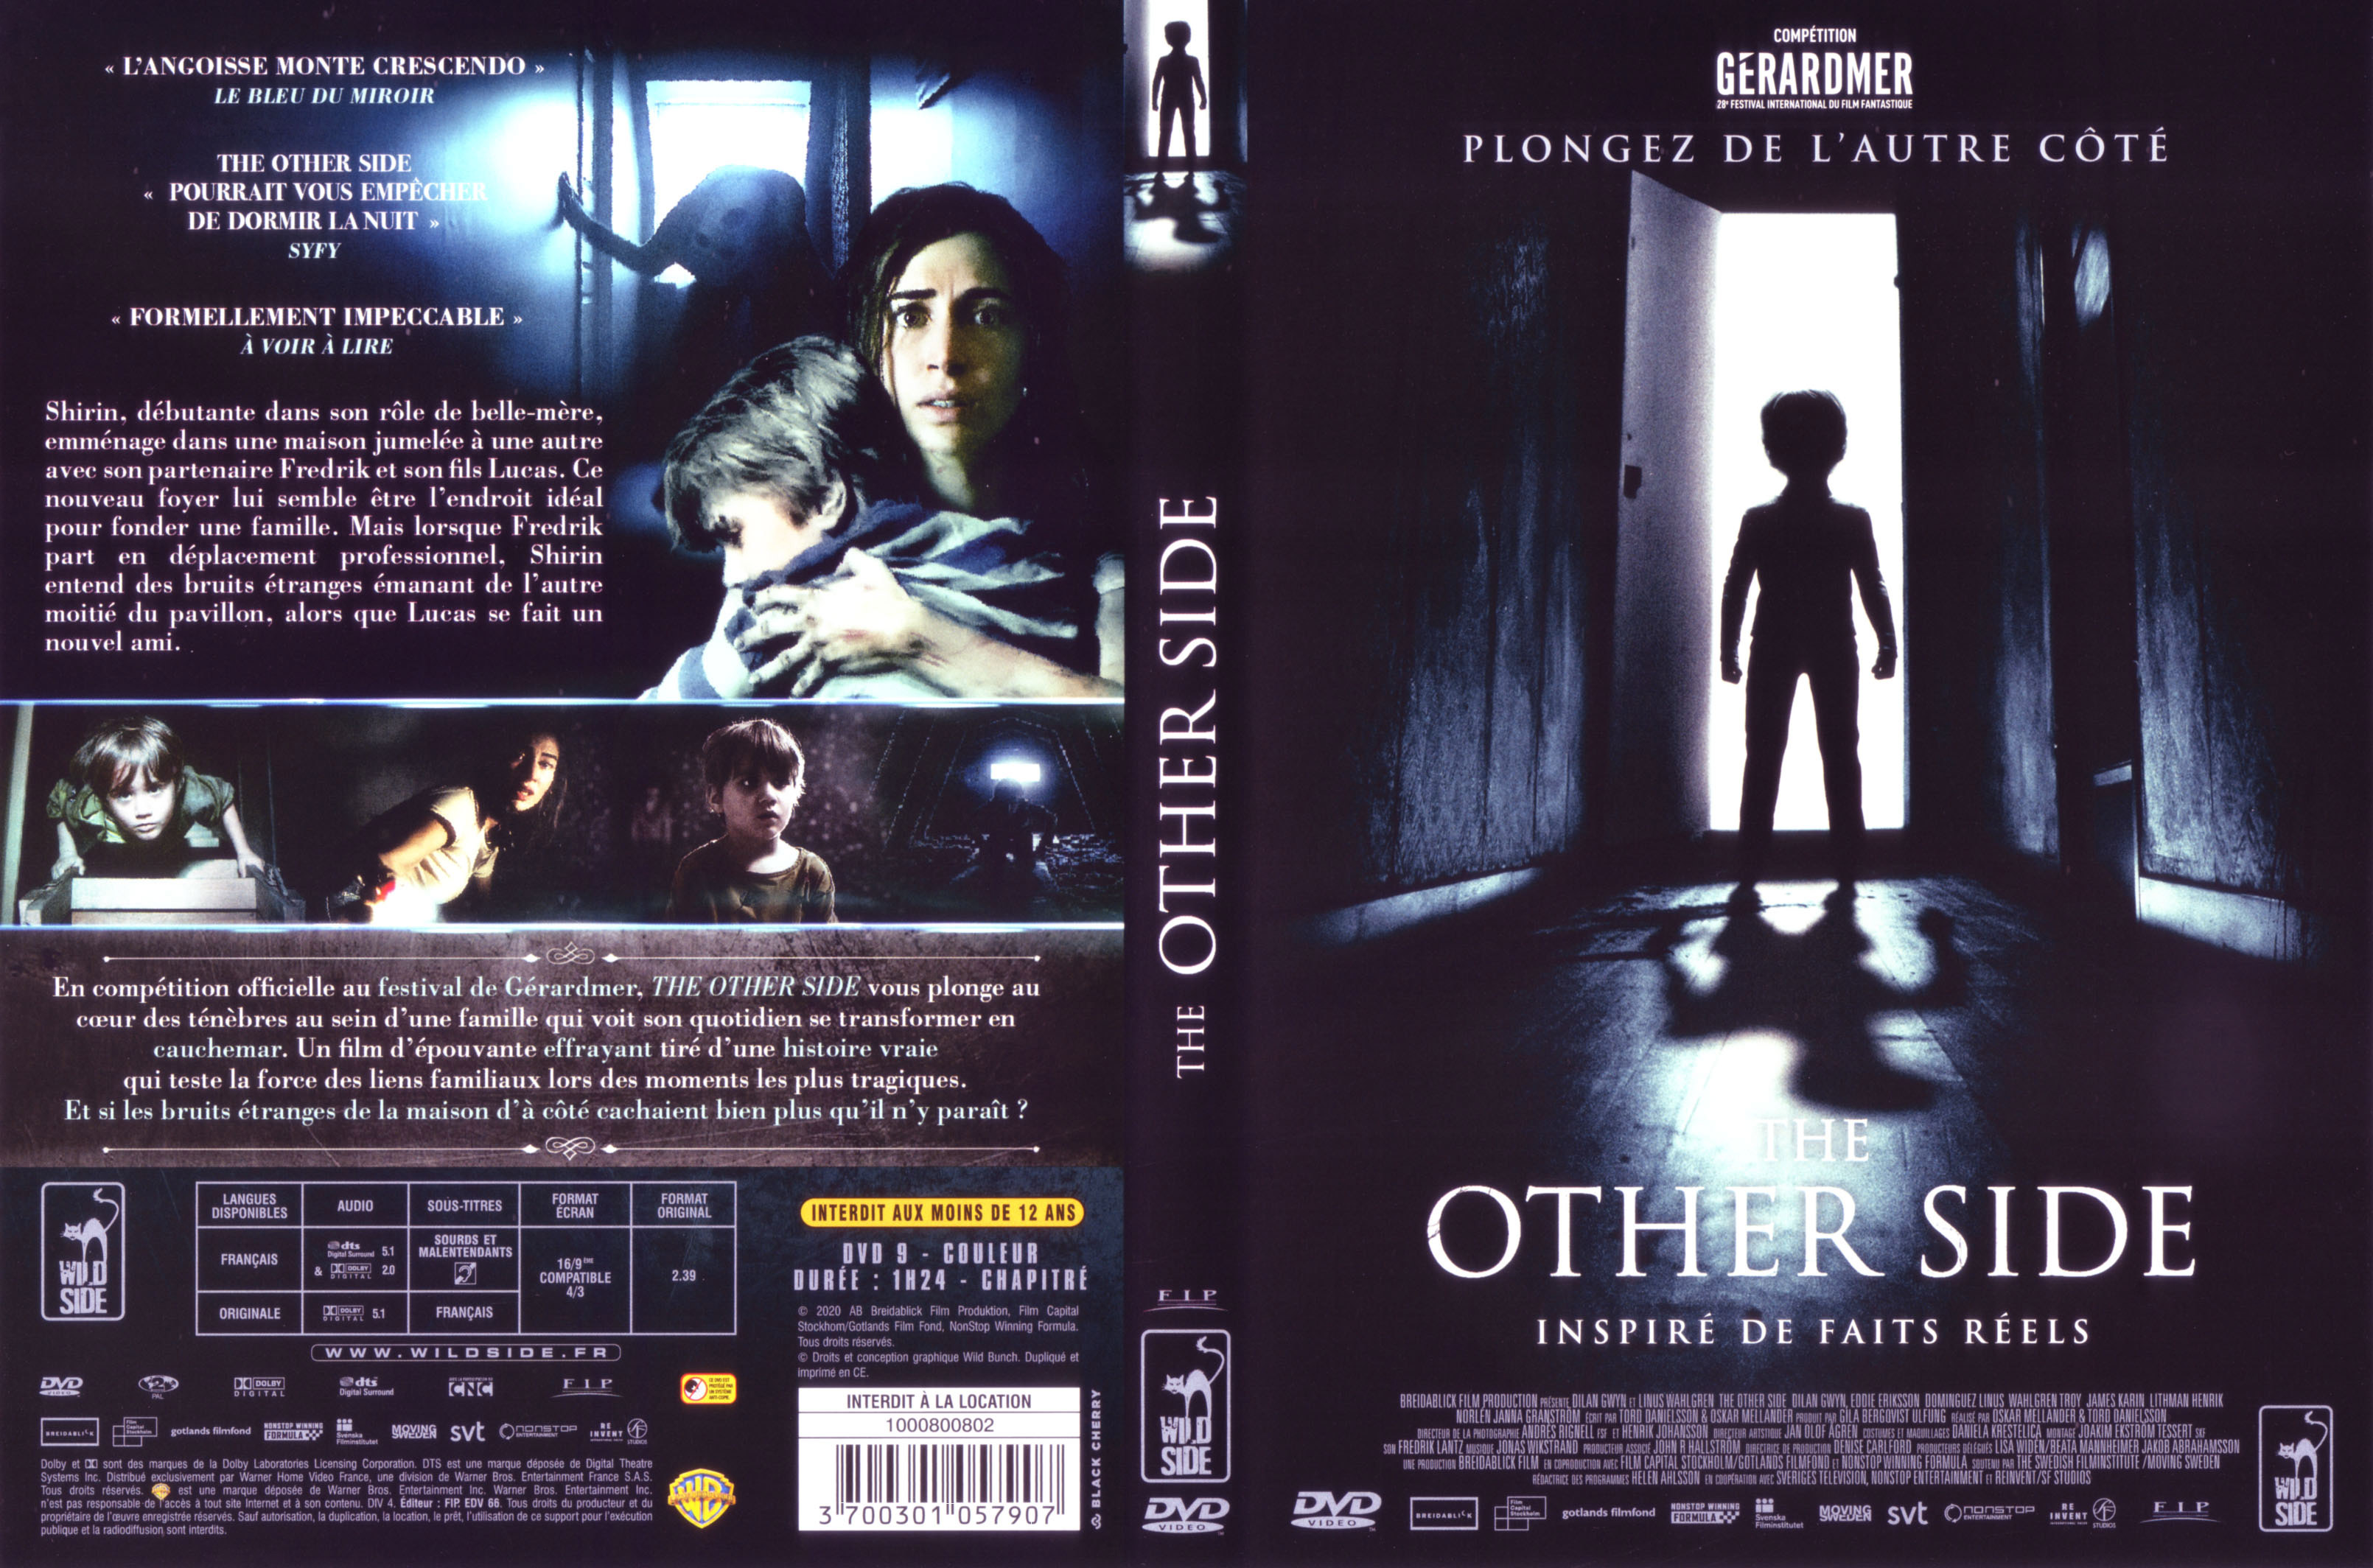 Jaquette DVD The other side